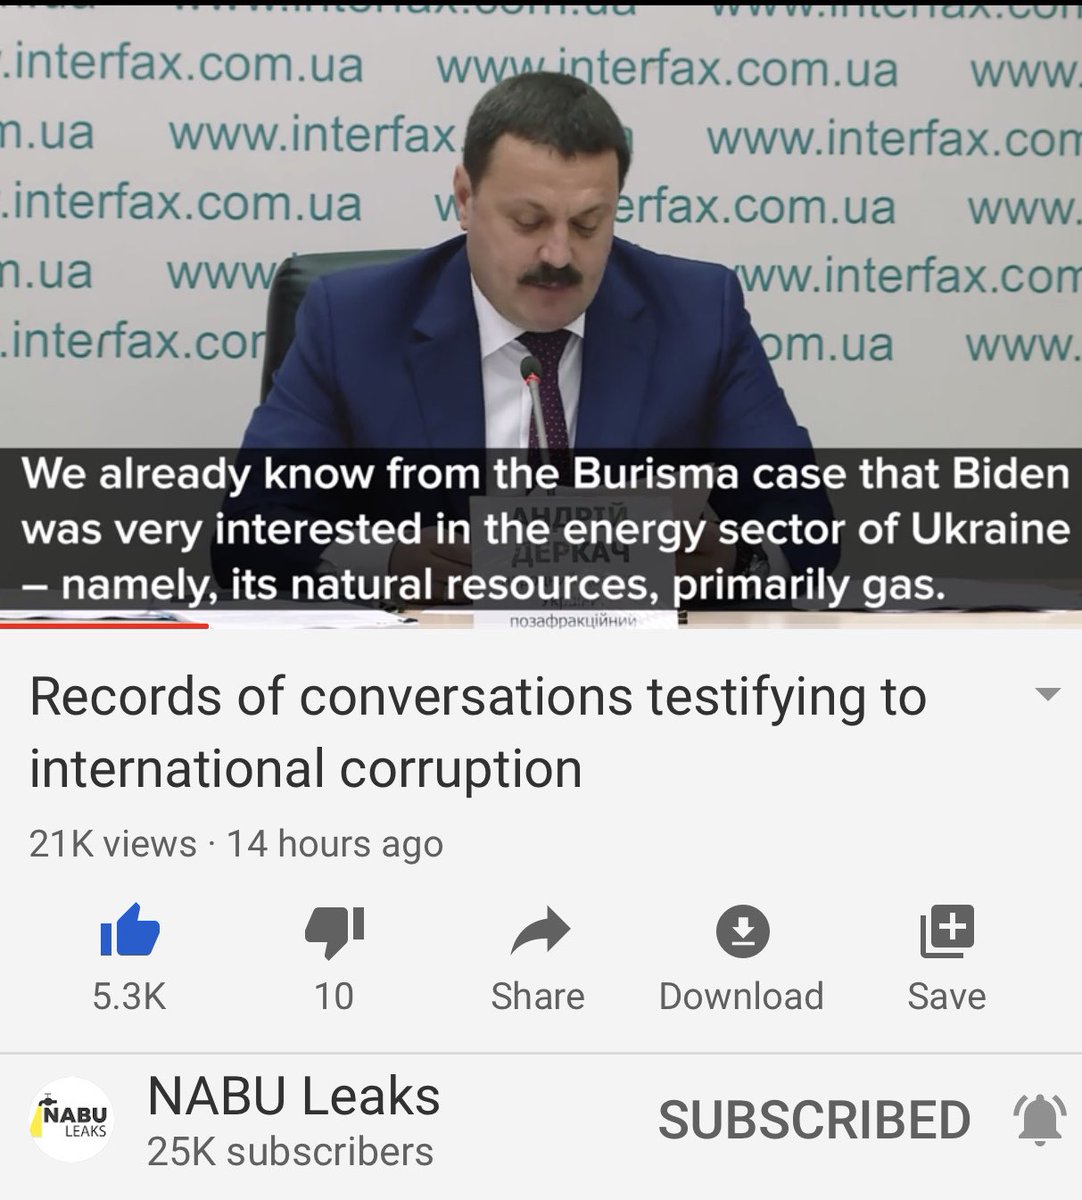 Ok I’m back and trust me, it gets even better - or worse...so now they’re discussing the fact that Biden was very interested in the energy sector and that Naftogaz CEO, Kobolyev, was subordinate to Biden